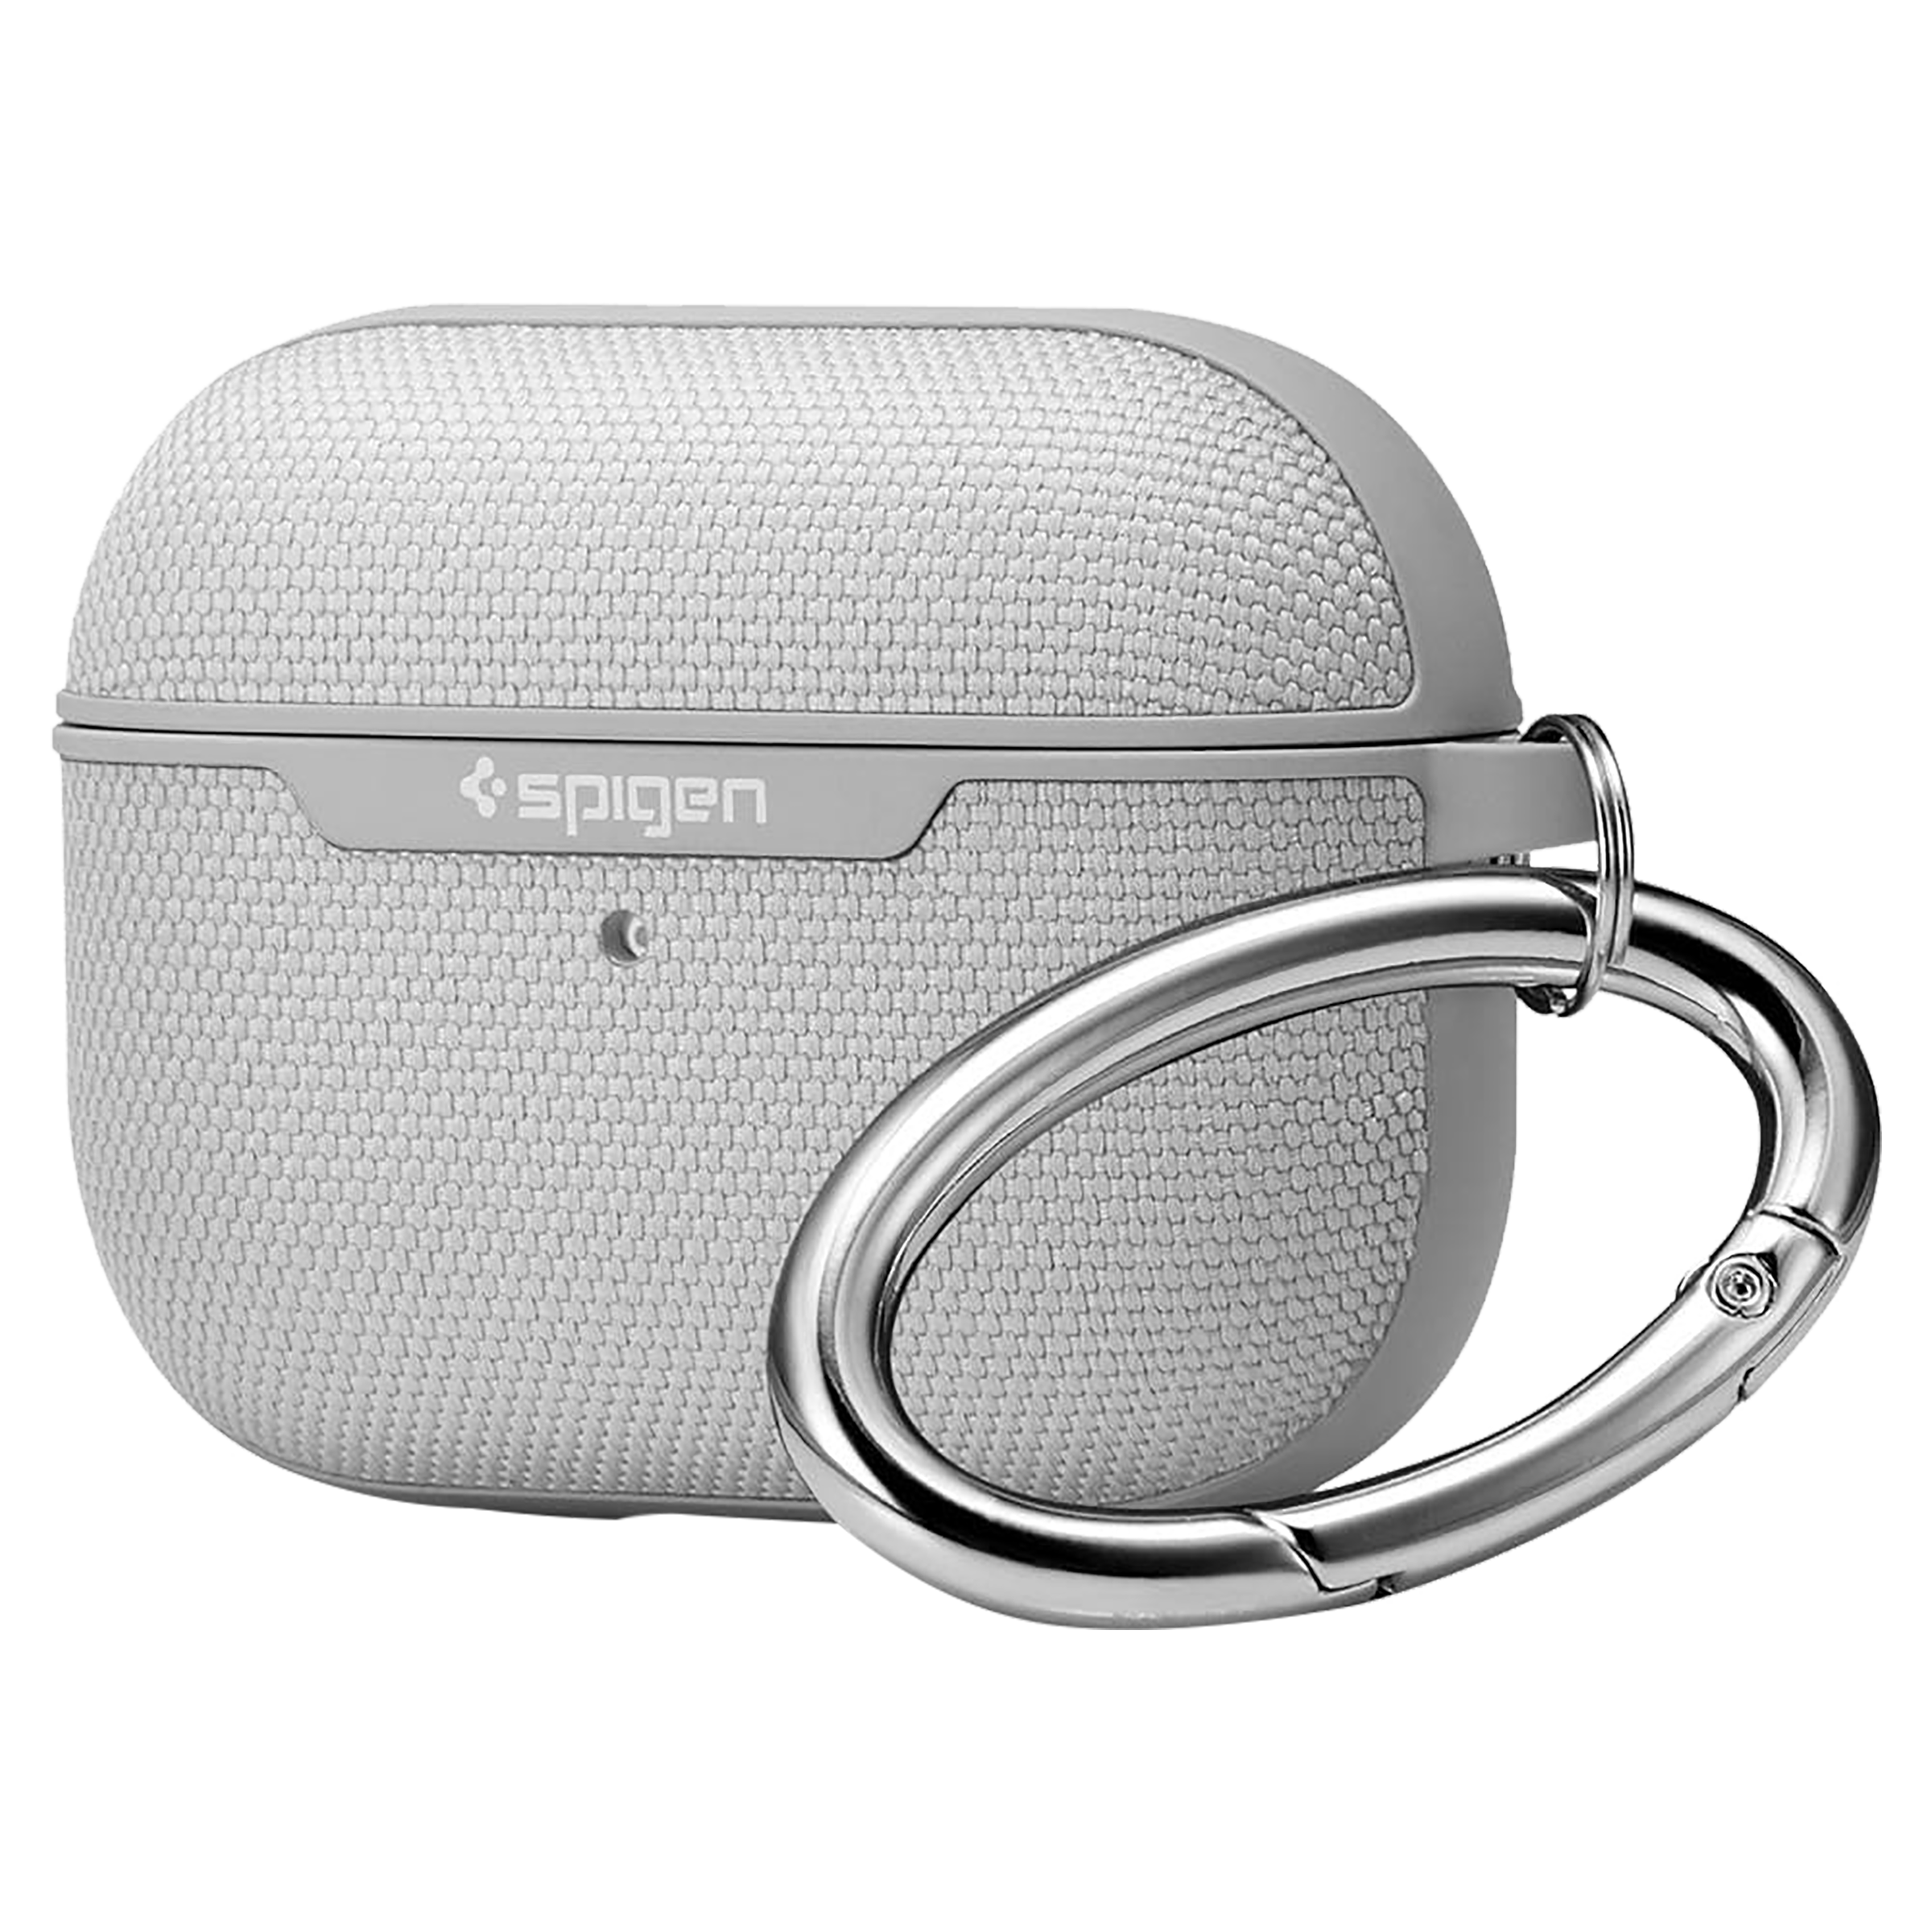 Spigen Urban Fit PC & Fabric Full Cover Case For AirPods Pro (Scratch-Free, ASD00573, Grey)_1